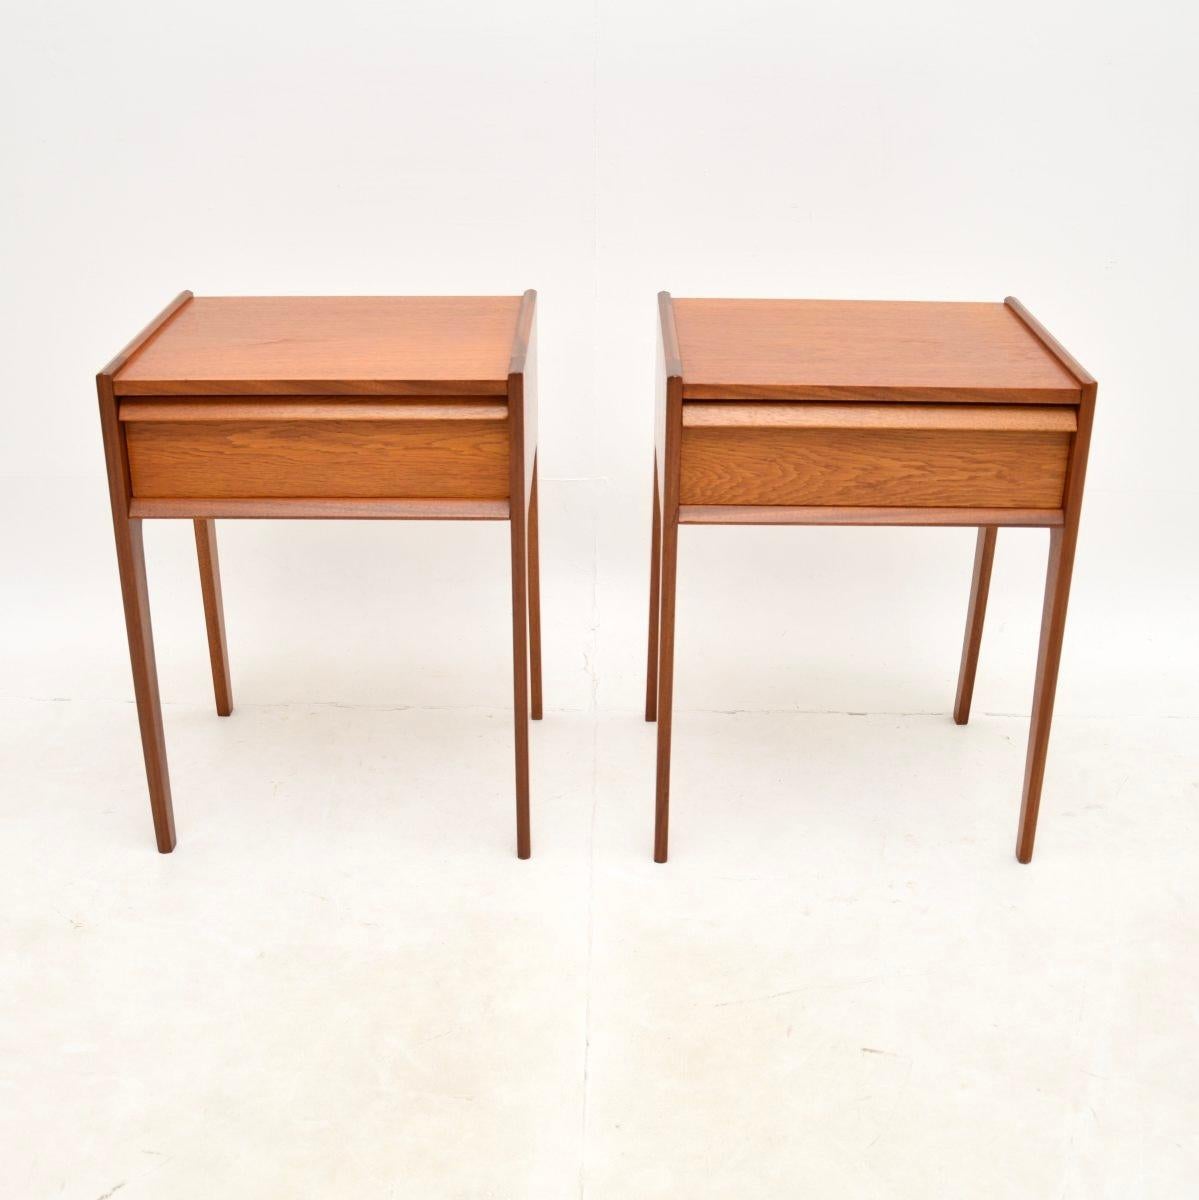 A stylish and extremely well made pair of vintage teak bedside tables by Younger. They were designed by John Herbert, they were made in England and date from the 1960’s.

The quality is superb, they are beautifully styled and are a very useful size.